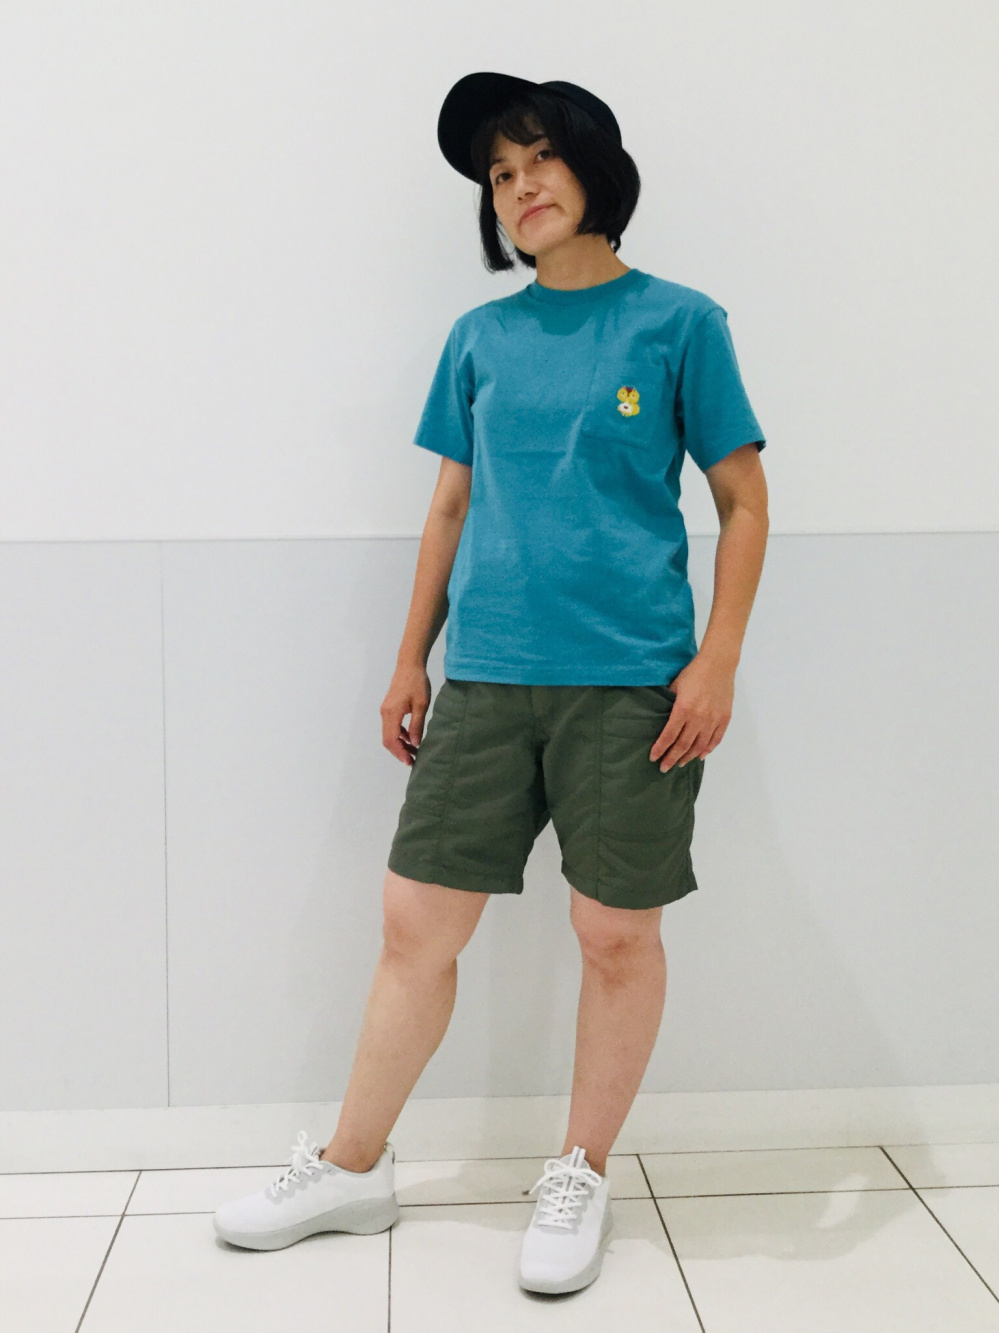 Check styling ideas for「AIRism Seamless V-Neck Short-Sleeve T